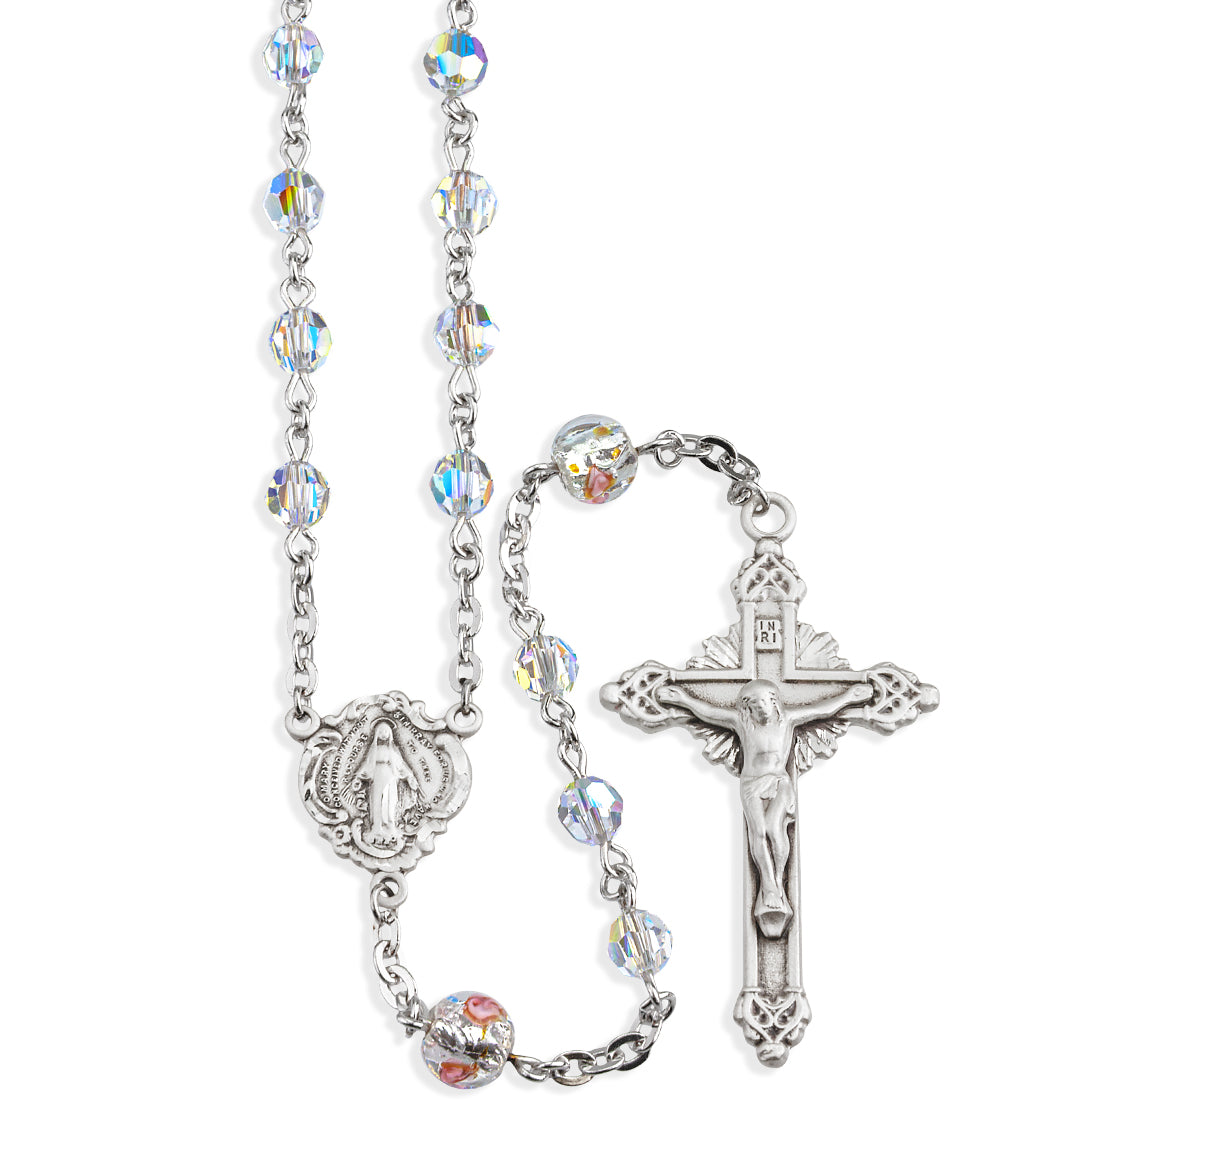 Rosary Sterling Crucifix and Centerpiece Created with Swarovski Crystal 5mm Aurora Borealis Beads by HMH